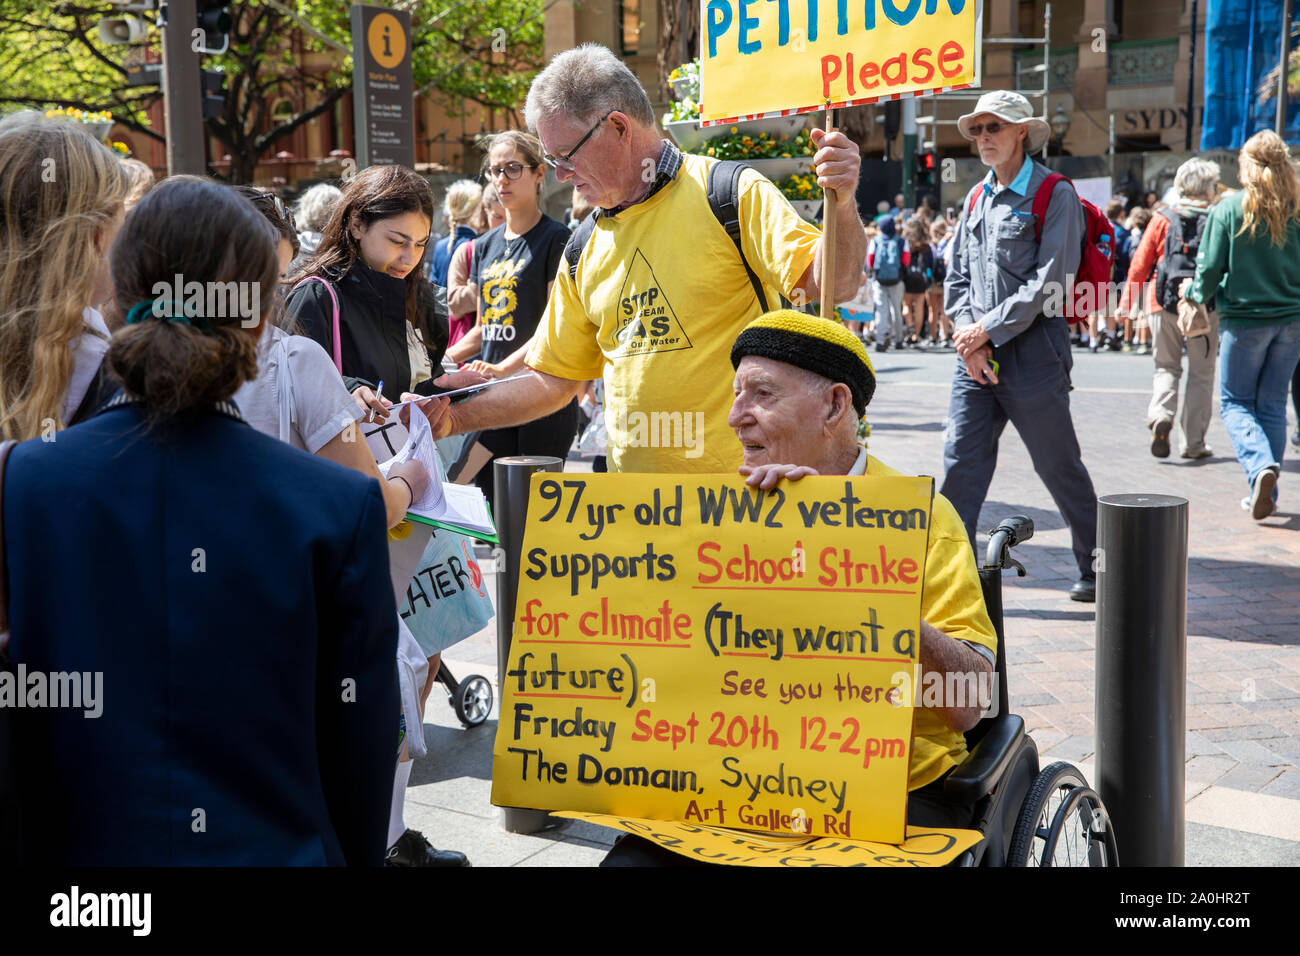 Man in wheelchair holds homemade protest sign at the sydney climate change strike rally,Australia Stock Photo